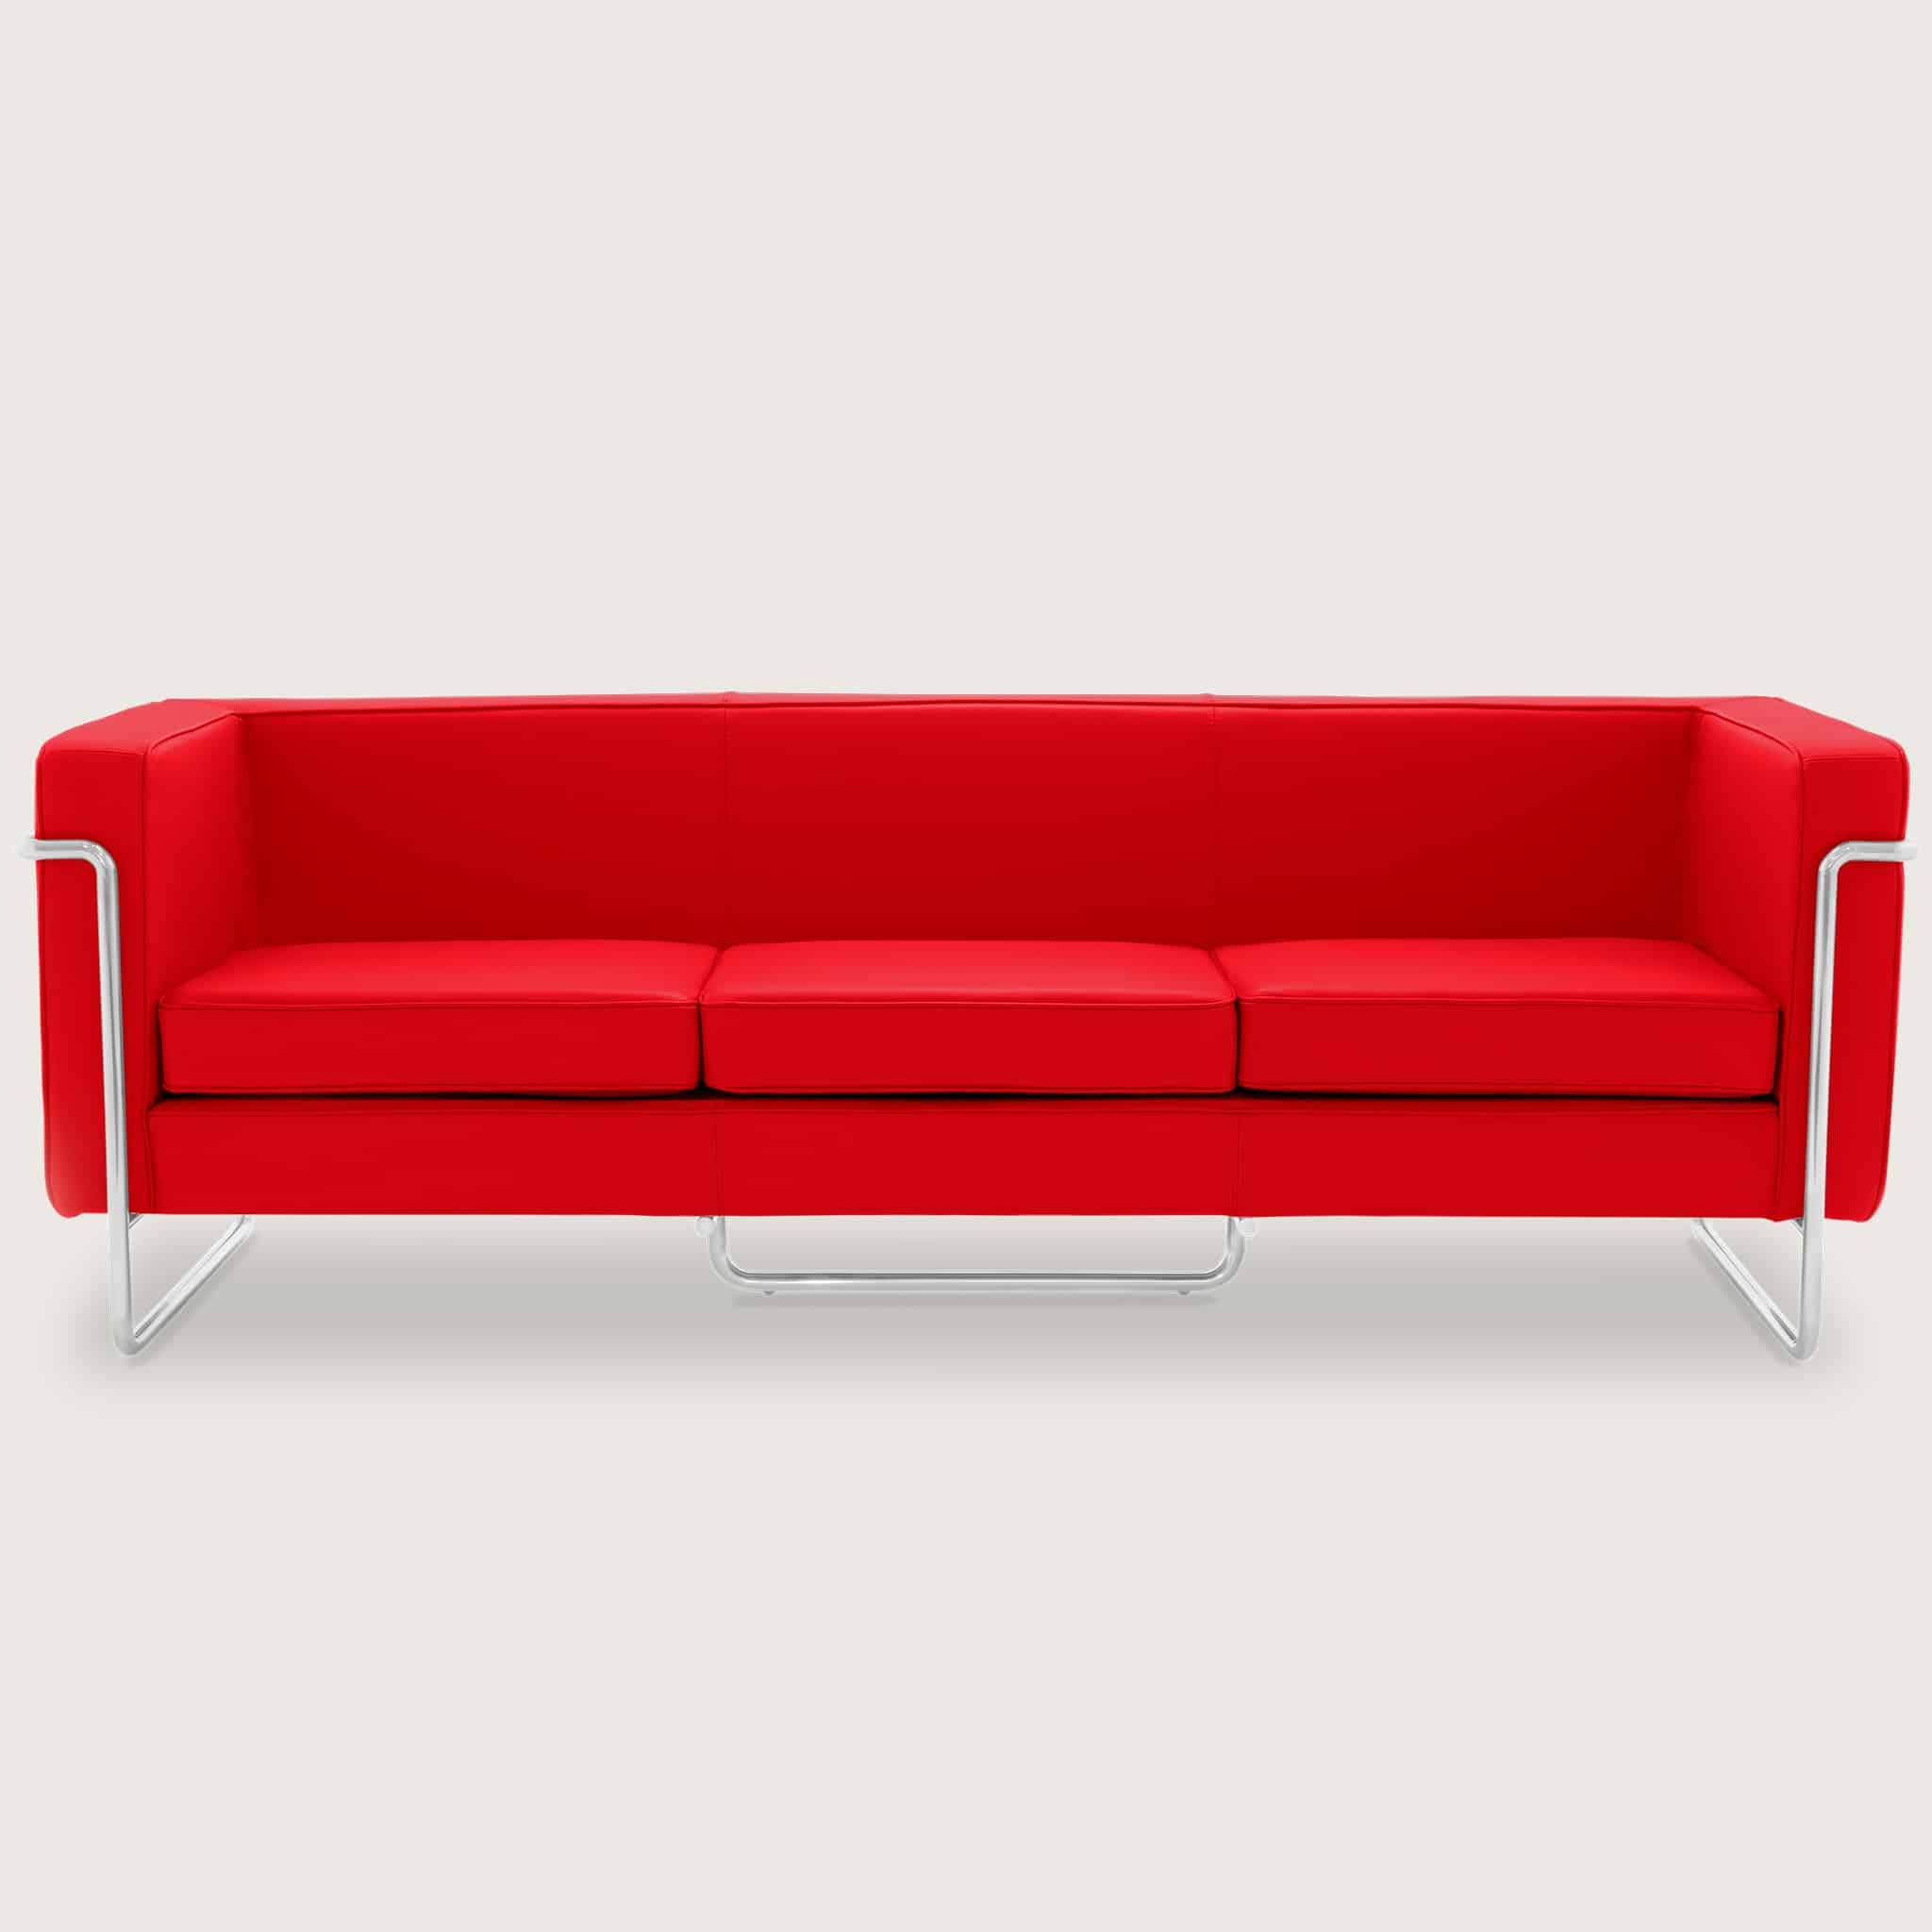 Le Bauhaus Dragon Red Leather 3 Seater 1